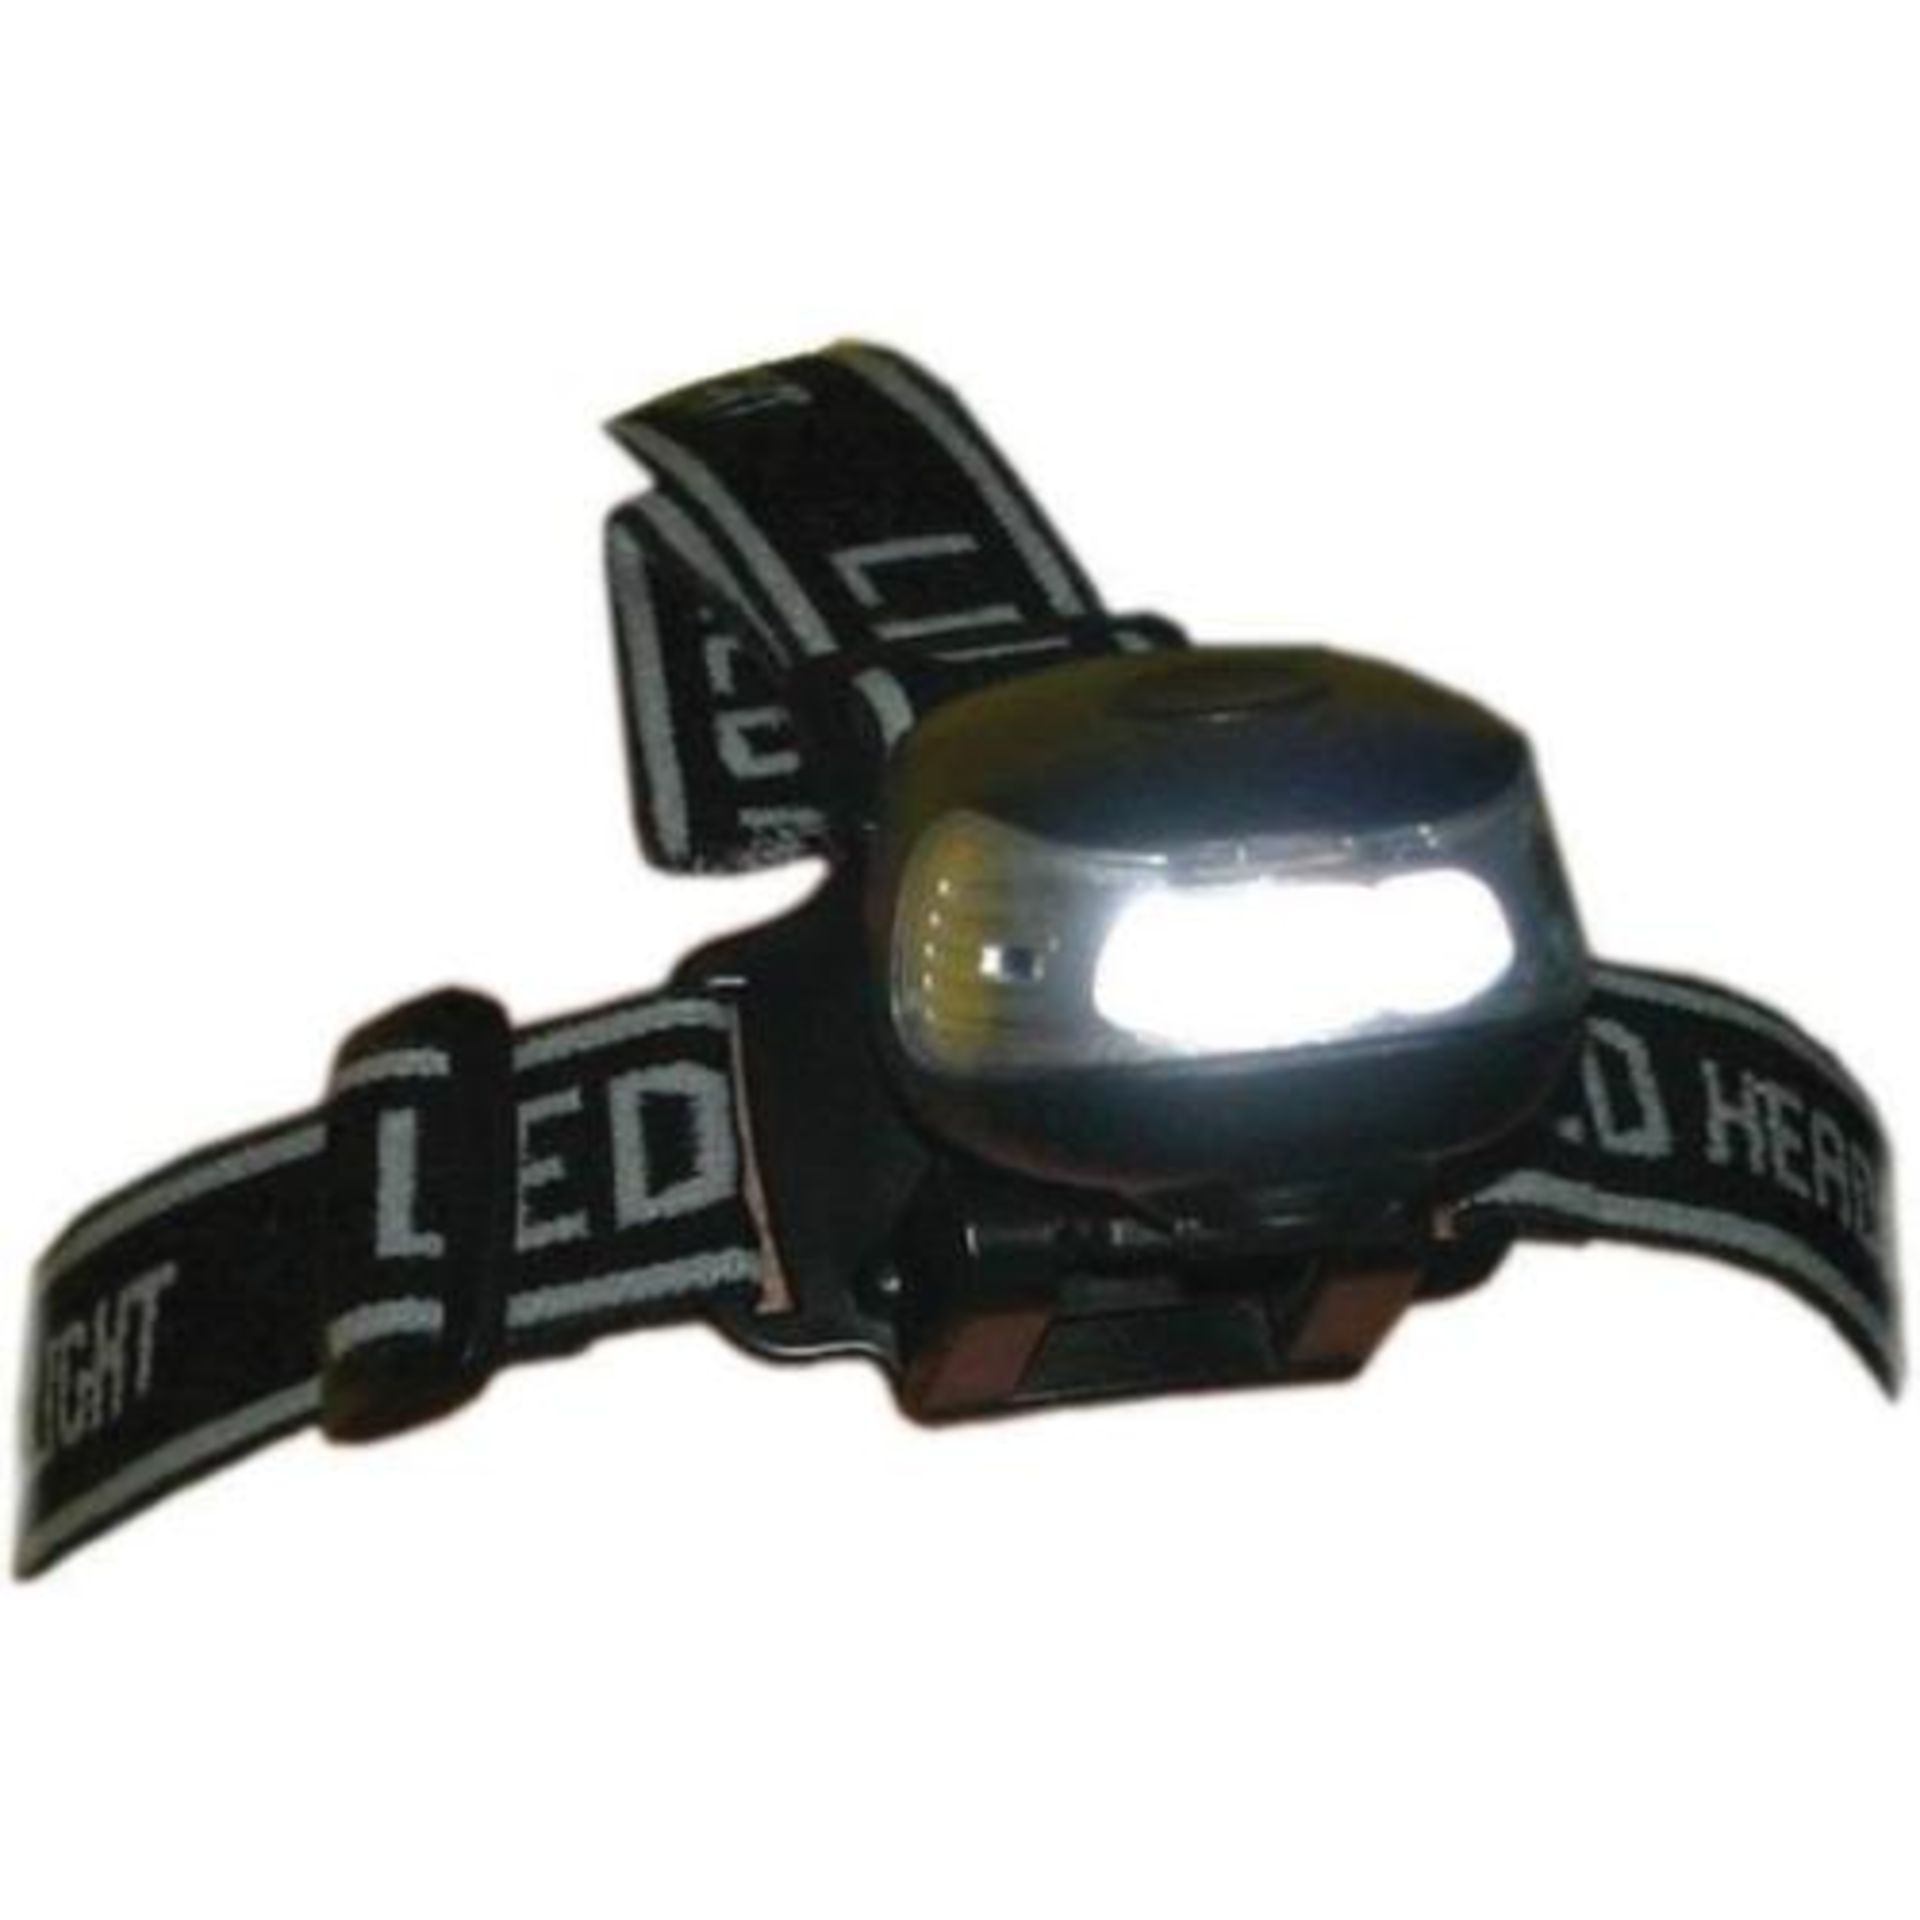 V Tritronic 3 Led wind up Head lamp No batteries required £19.99 X  6  Bid price to be multiplied by - Image 2 of 4